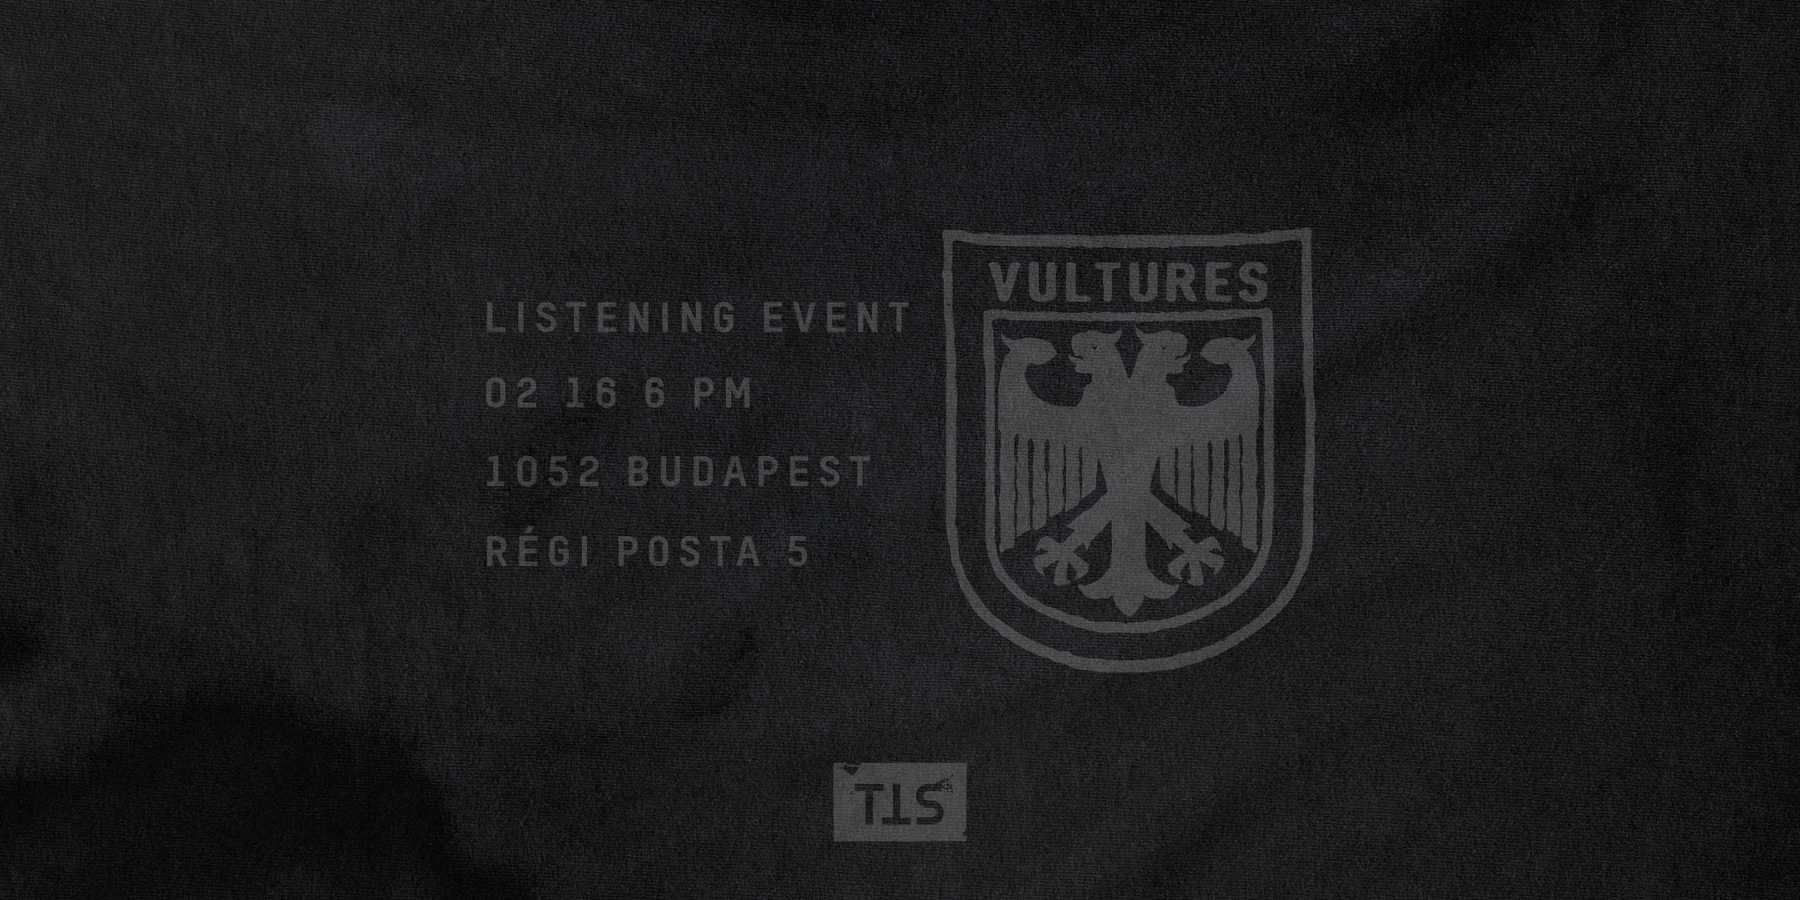 Kanye West & Ty Dolla $ign - Vultures vol. 1 Album Listening Party